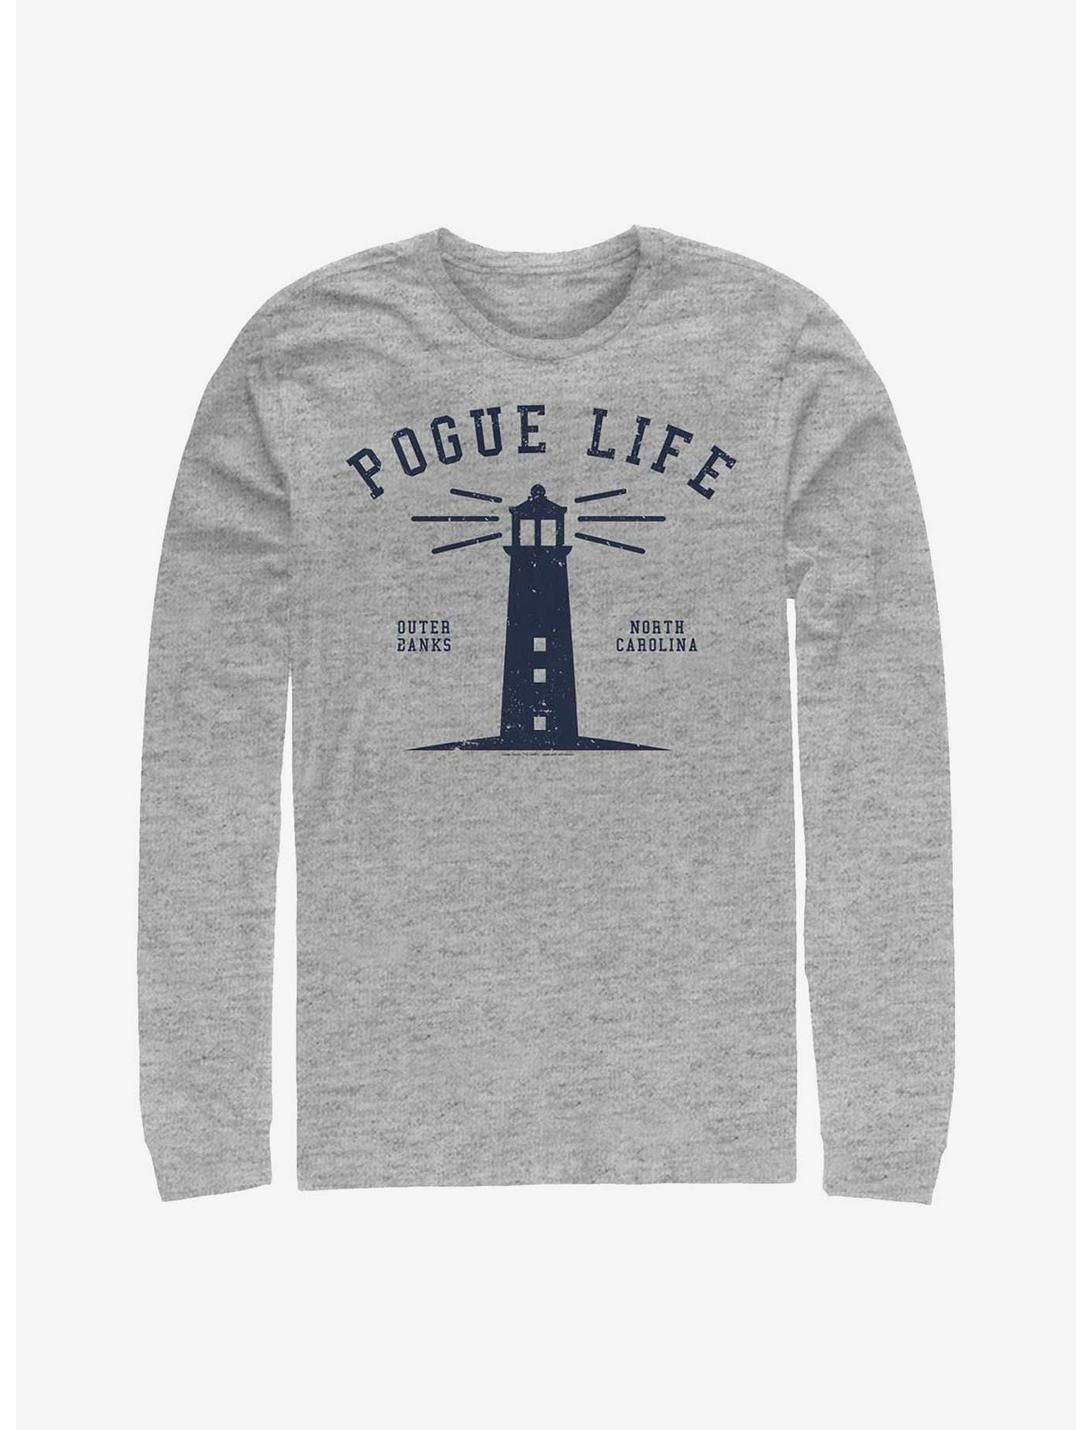 Outer Banks Lighthouse Pogue Life Long-Sleeve T-Shirt, ATH HTR, hi-res